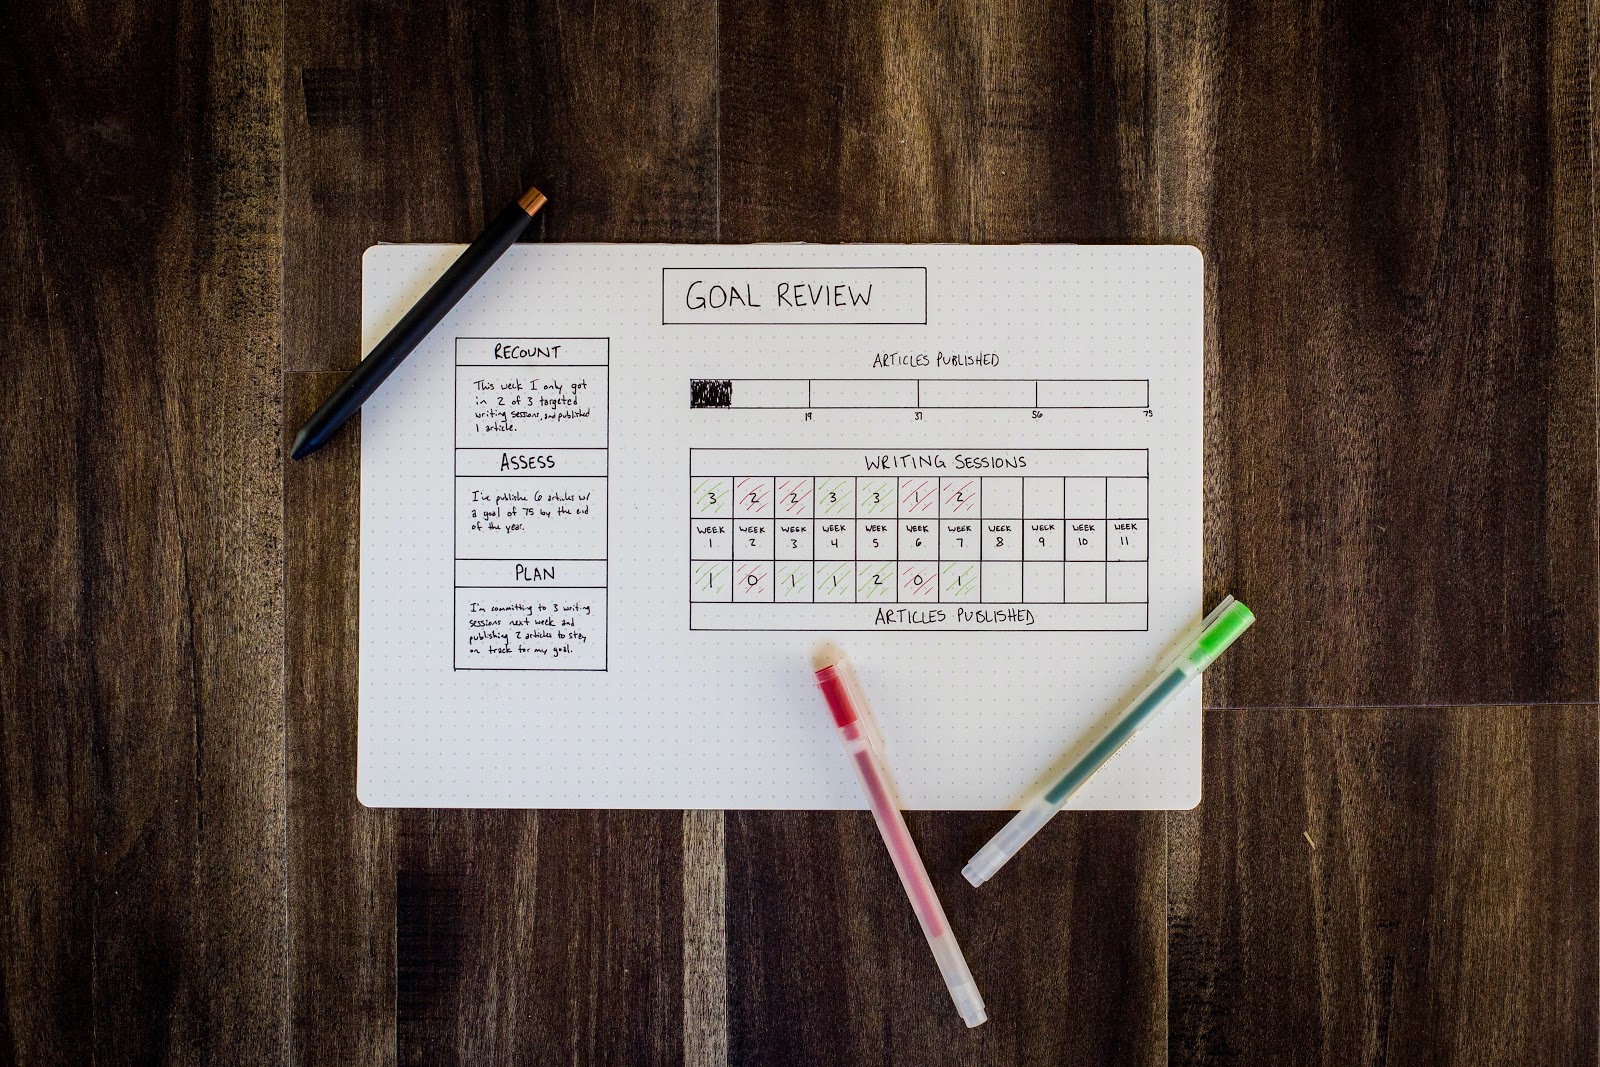 starting an etsy shop means keeping track of the goals that matter most to you